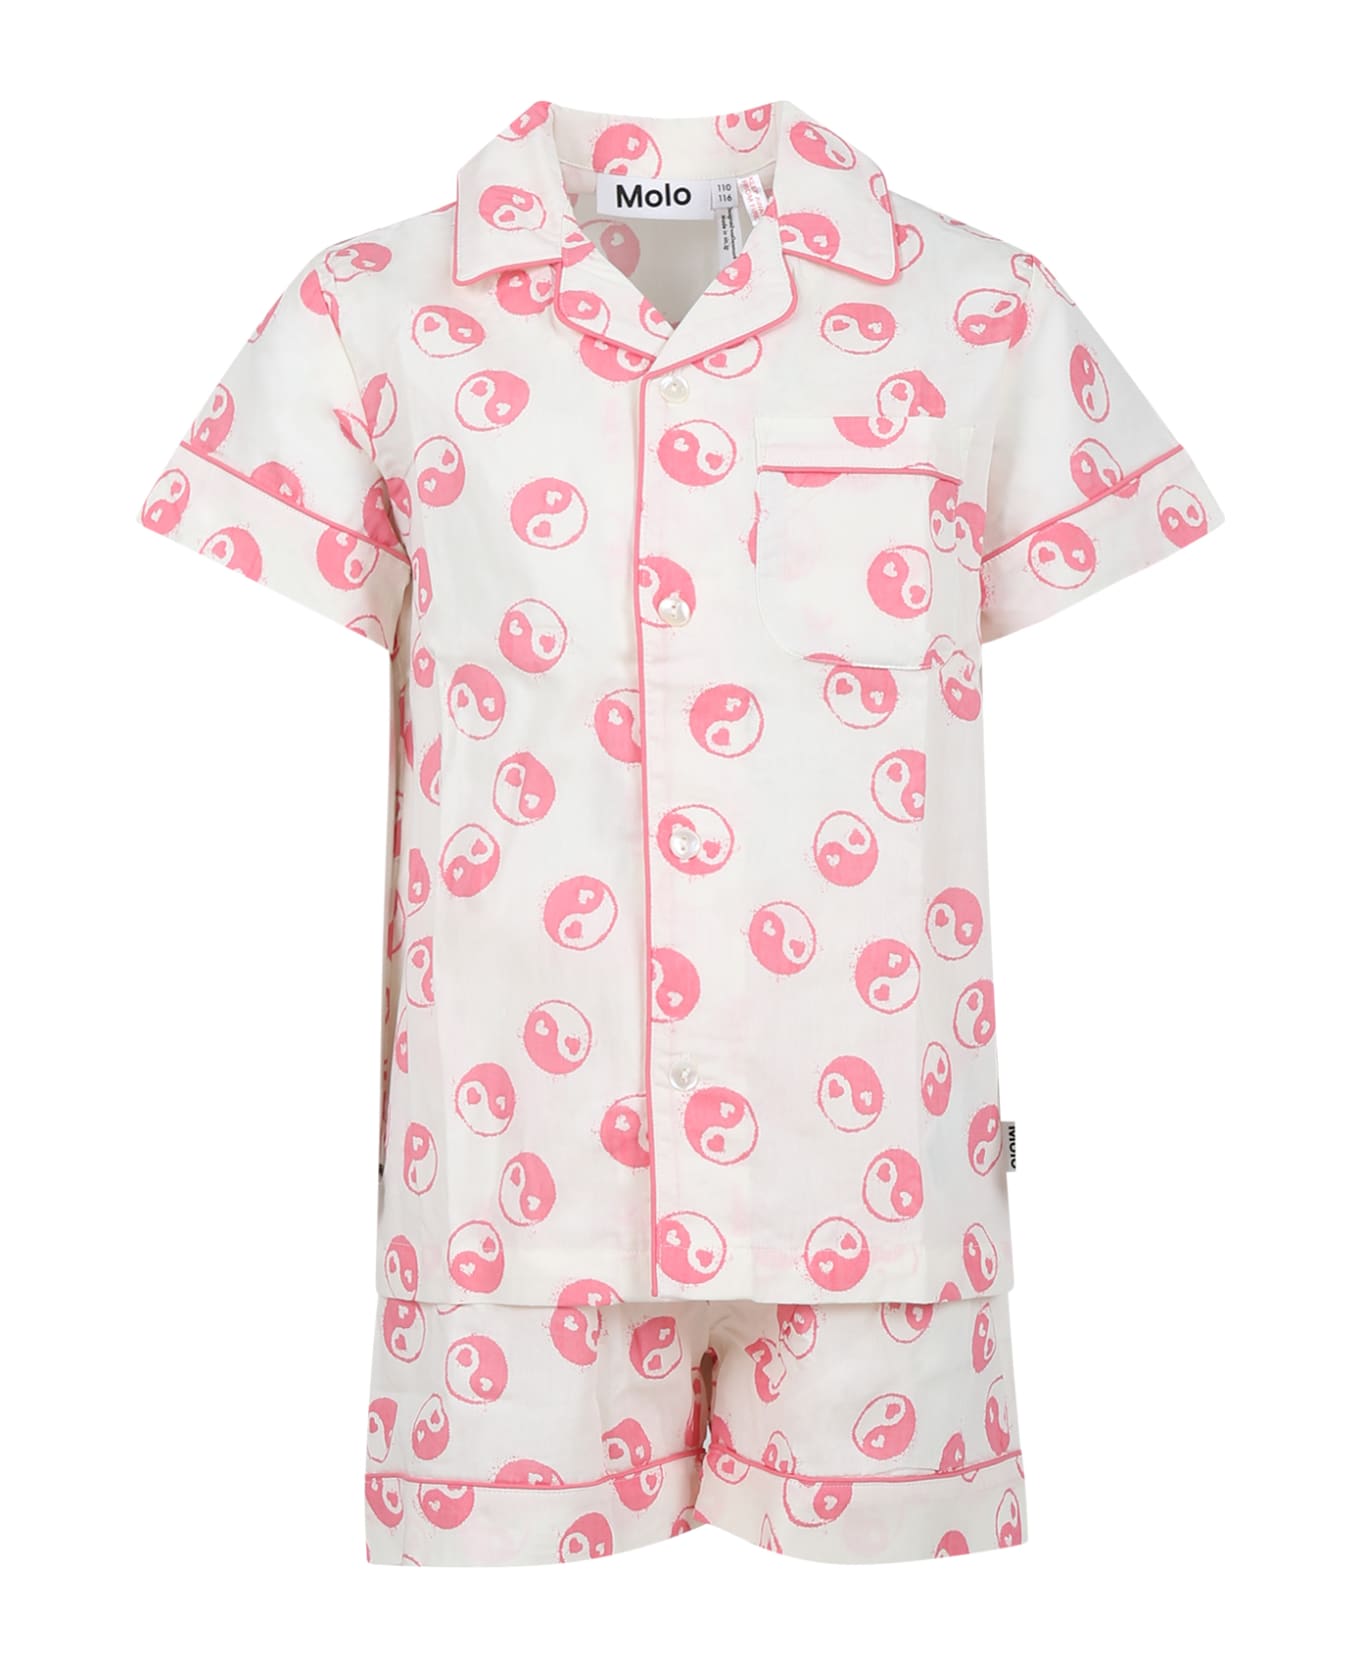 Molo White Pajamas For Kids With Smiley - Pink ジャンプスーツ